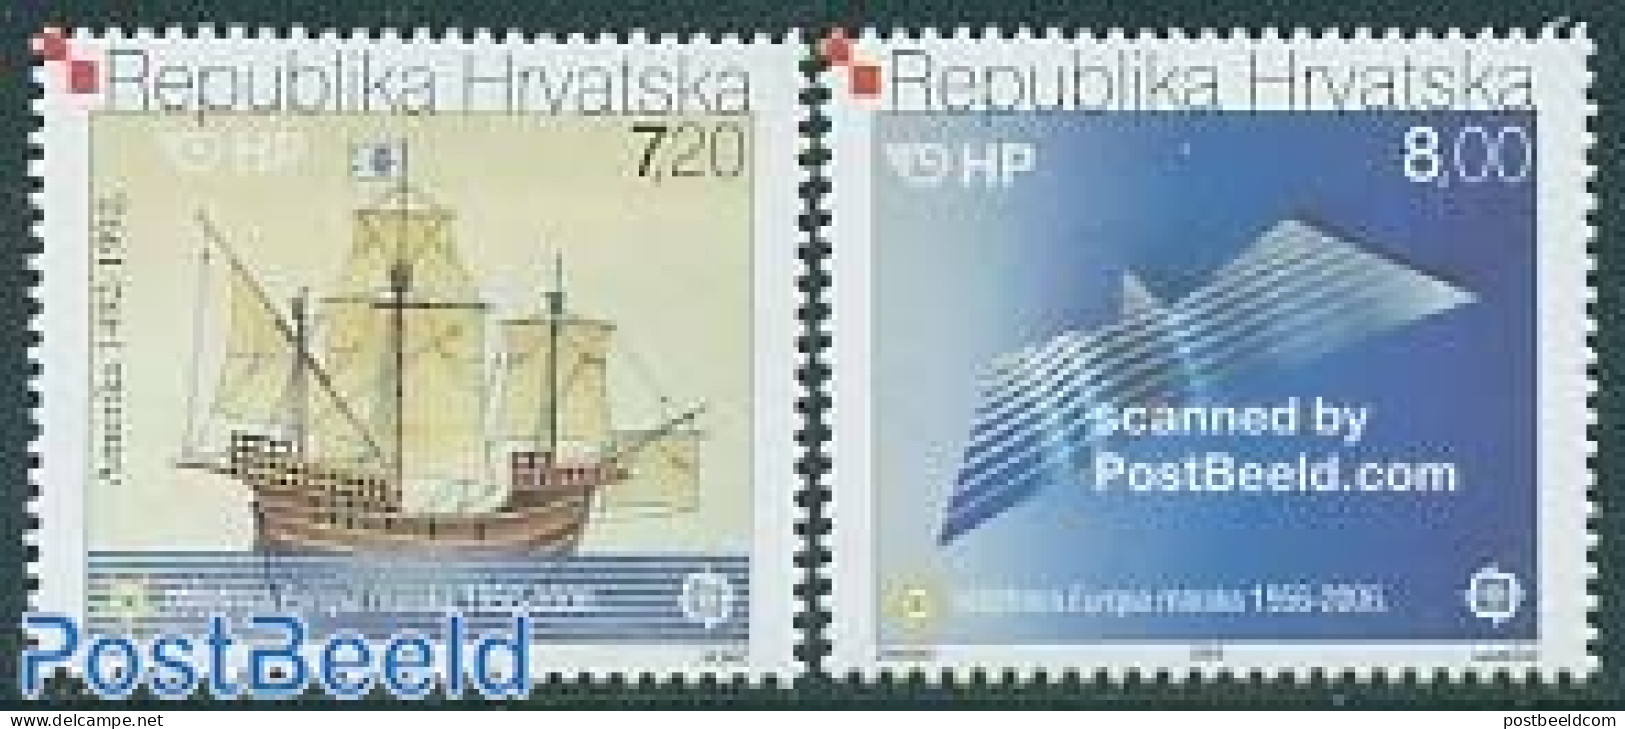 Croatia 2005 50 Years Europa Stamps 2v, Mint NH, History - Transport - Europa Hang-on Issues - Ships And Boats - Idee Europee